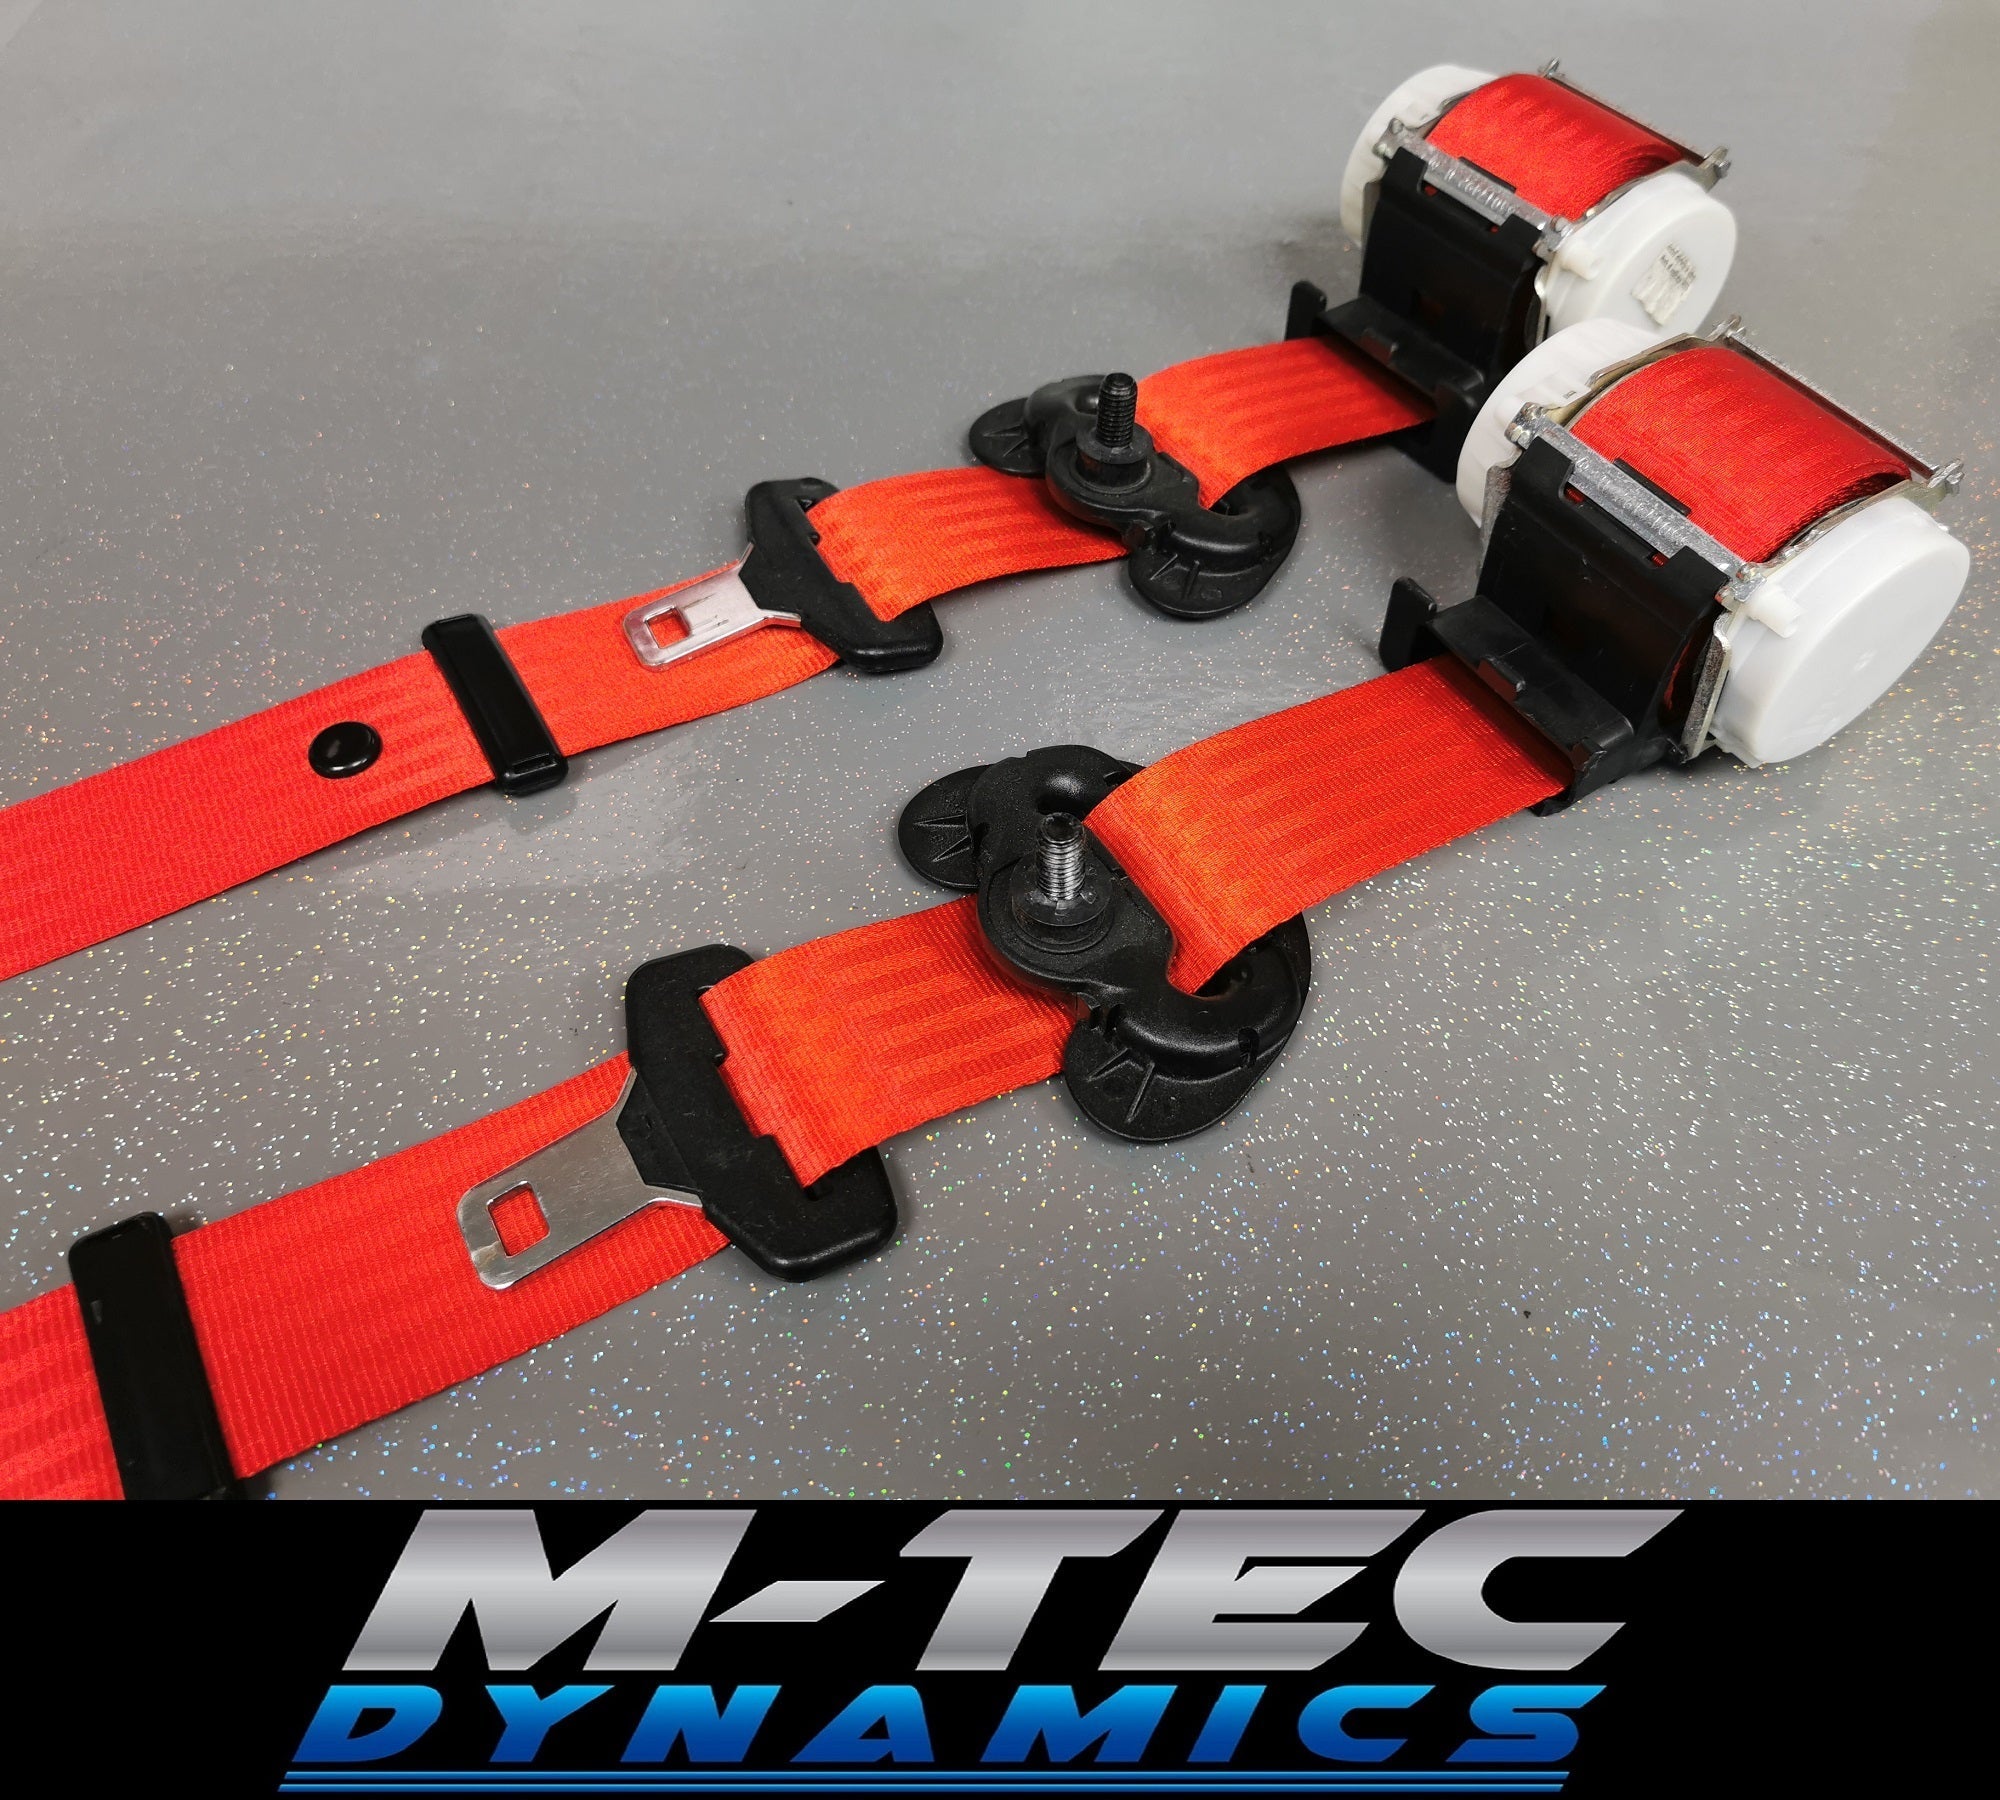 BMW 3-SERIES E92 COUPE (M3) RED FRONT SEAT BELT SET